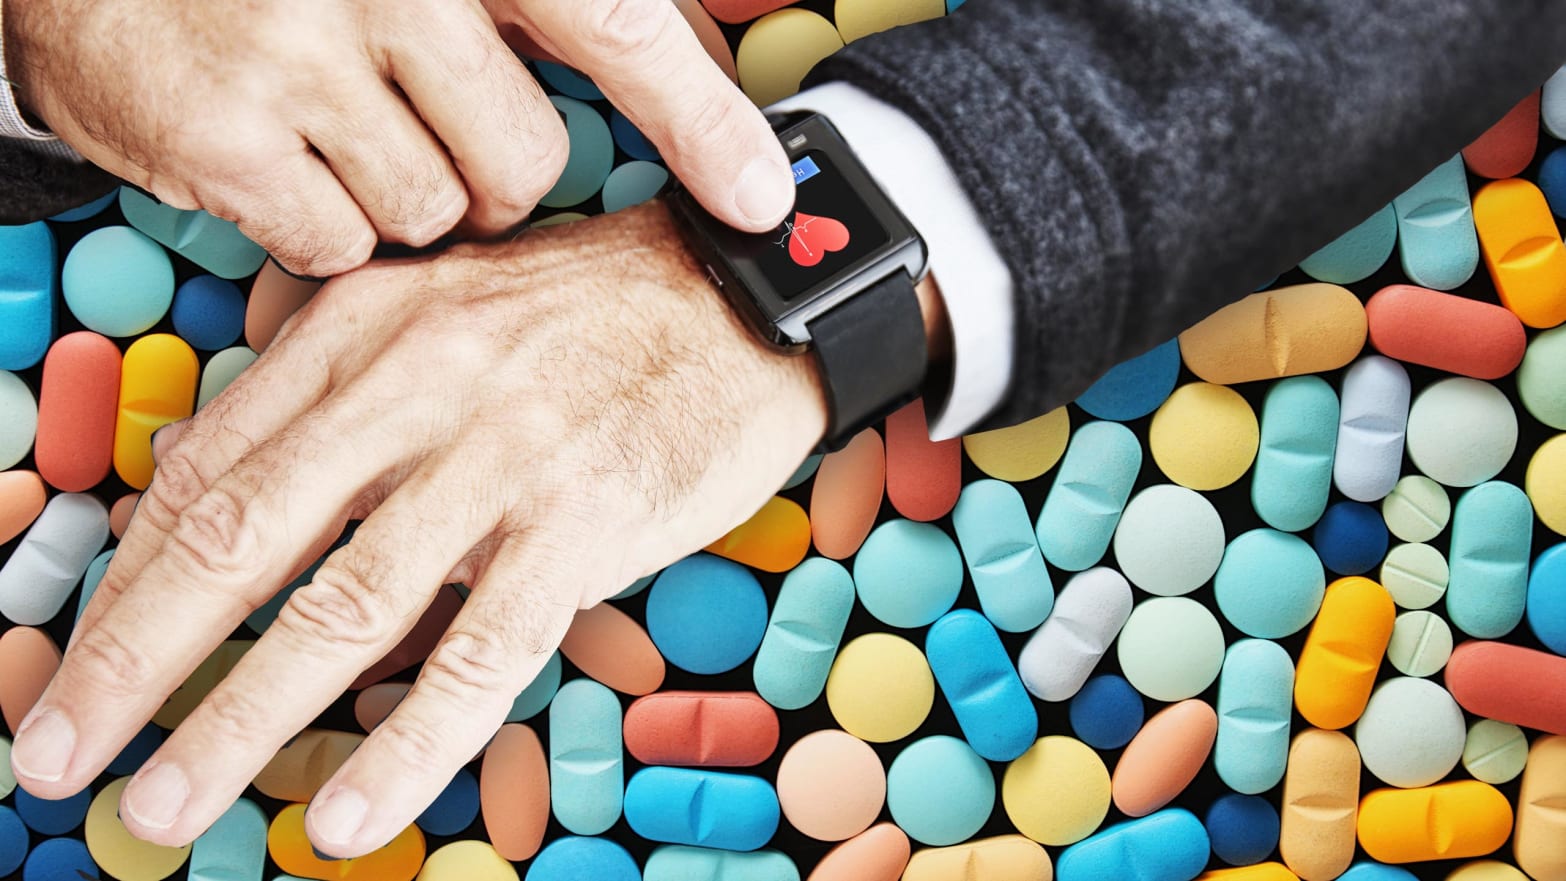 photo of hand with fitbit fit bit showing heart over tablets and pills john hancock insurance company west virginia life health fitness tracker